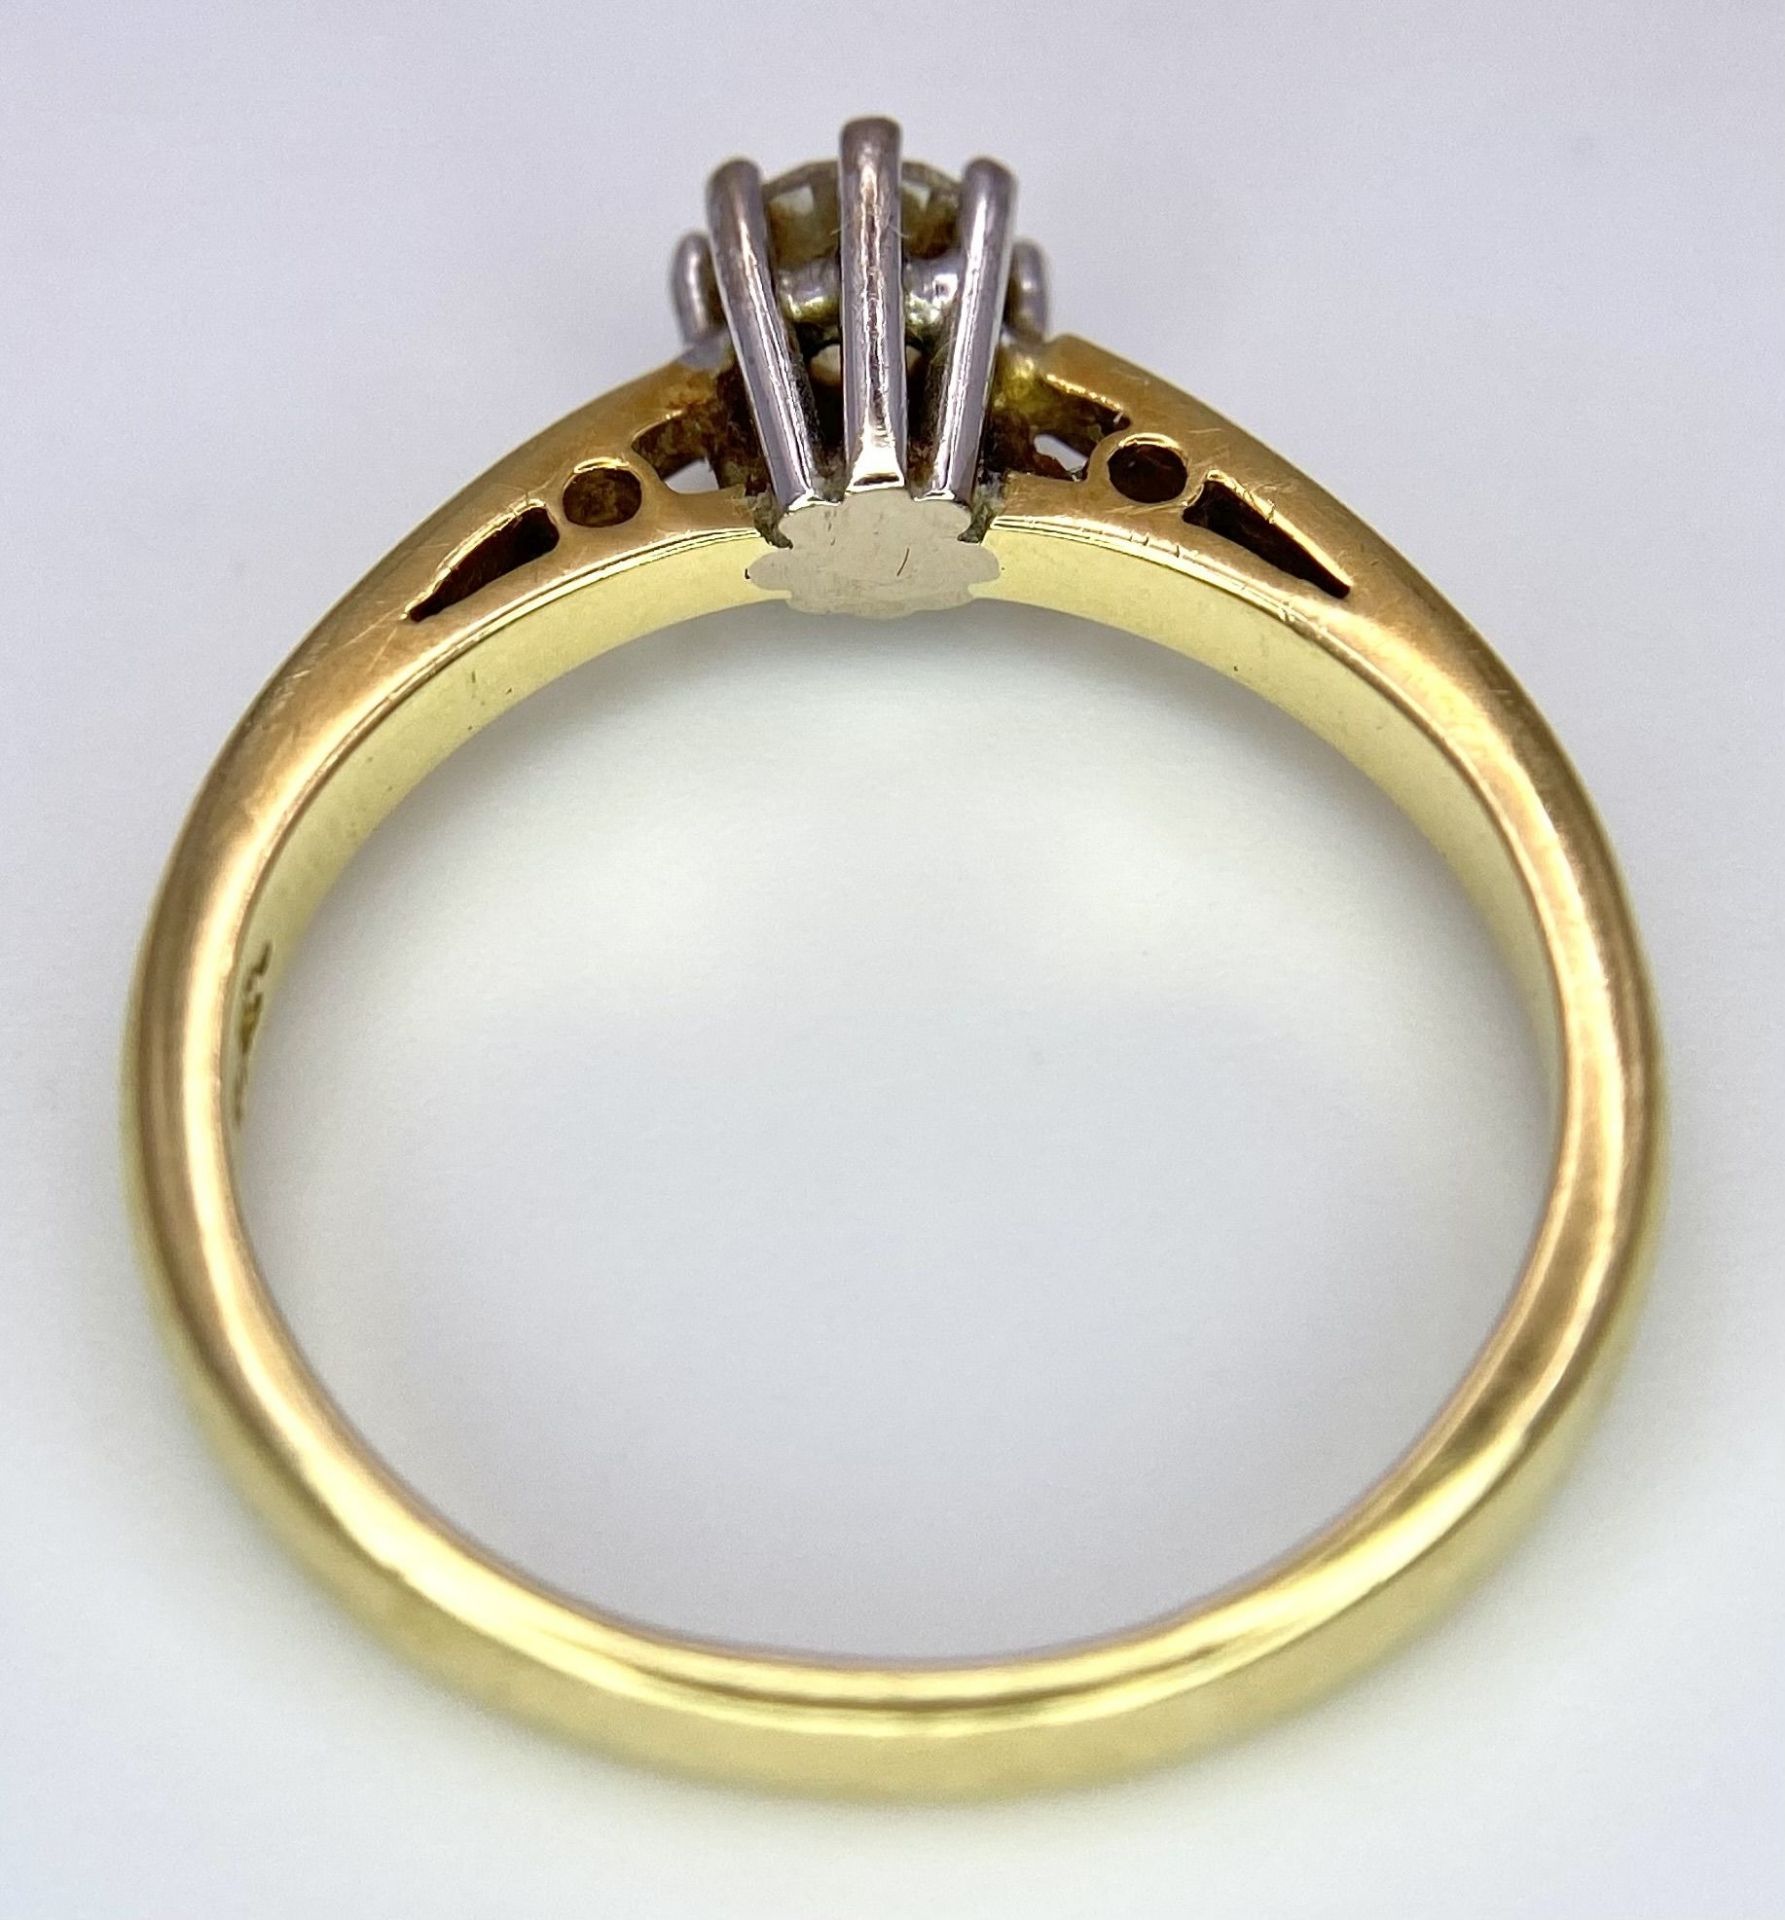 A Vintage 18K Yellow Gold Diamond Solitaire Ring. 0.40ct brilliant round cut diamond. Size L. 3.4g - Image 4 of 7